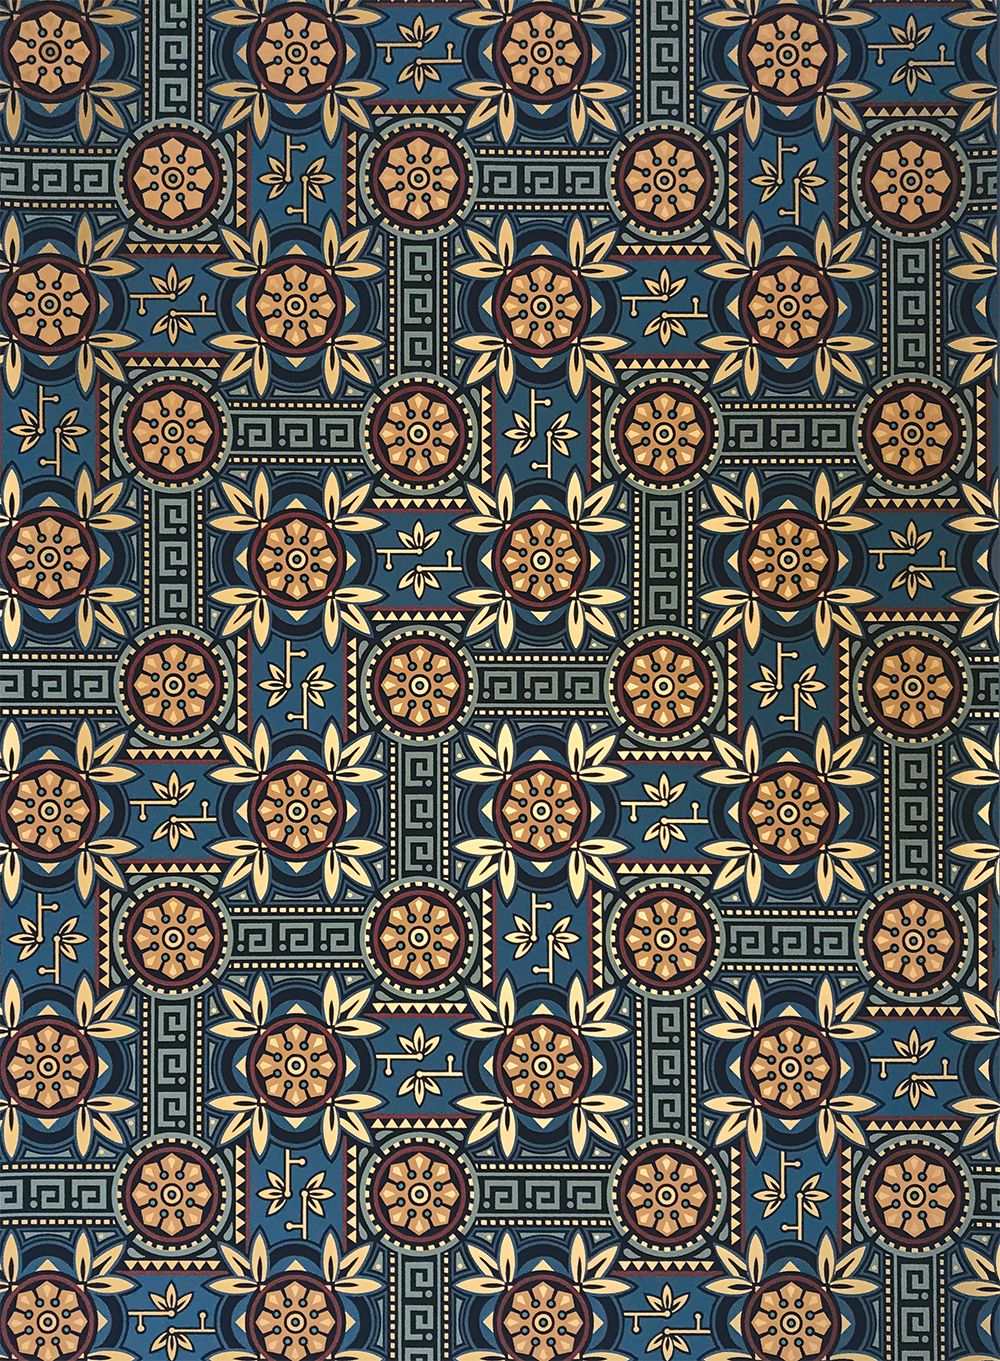 A dark blue fabric with a repeating pattern of orange and brown flowers and green leaves - Indigo, Victorian